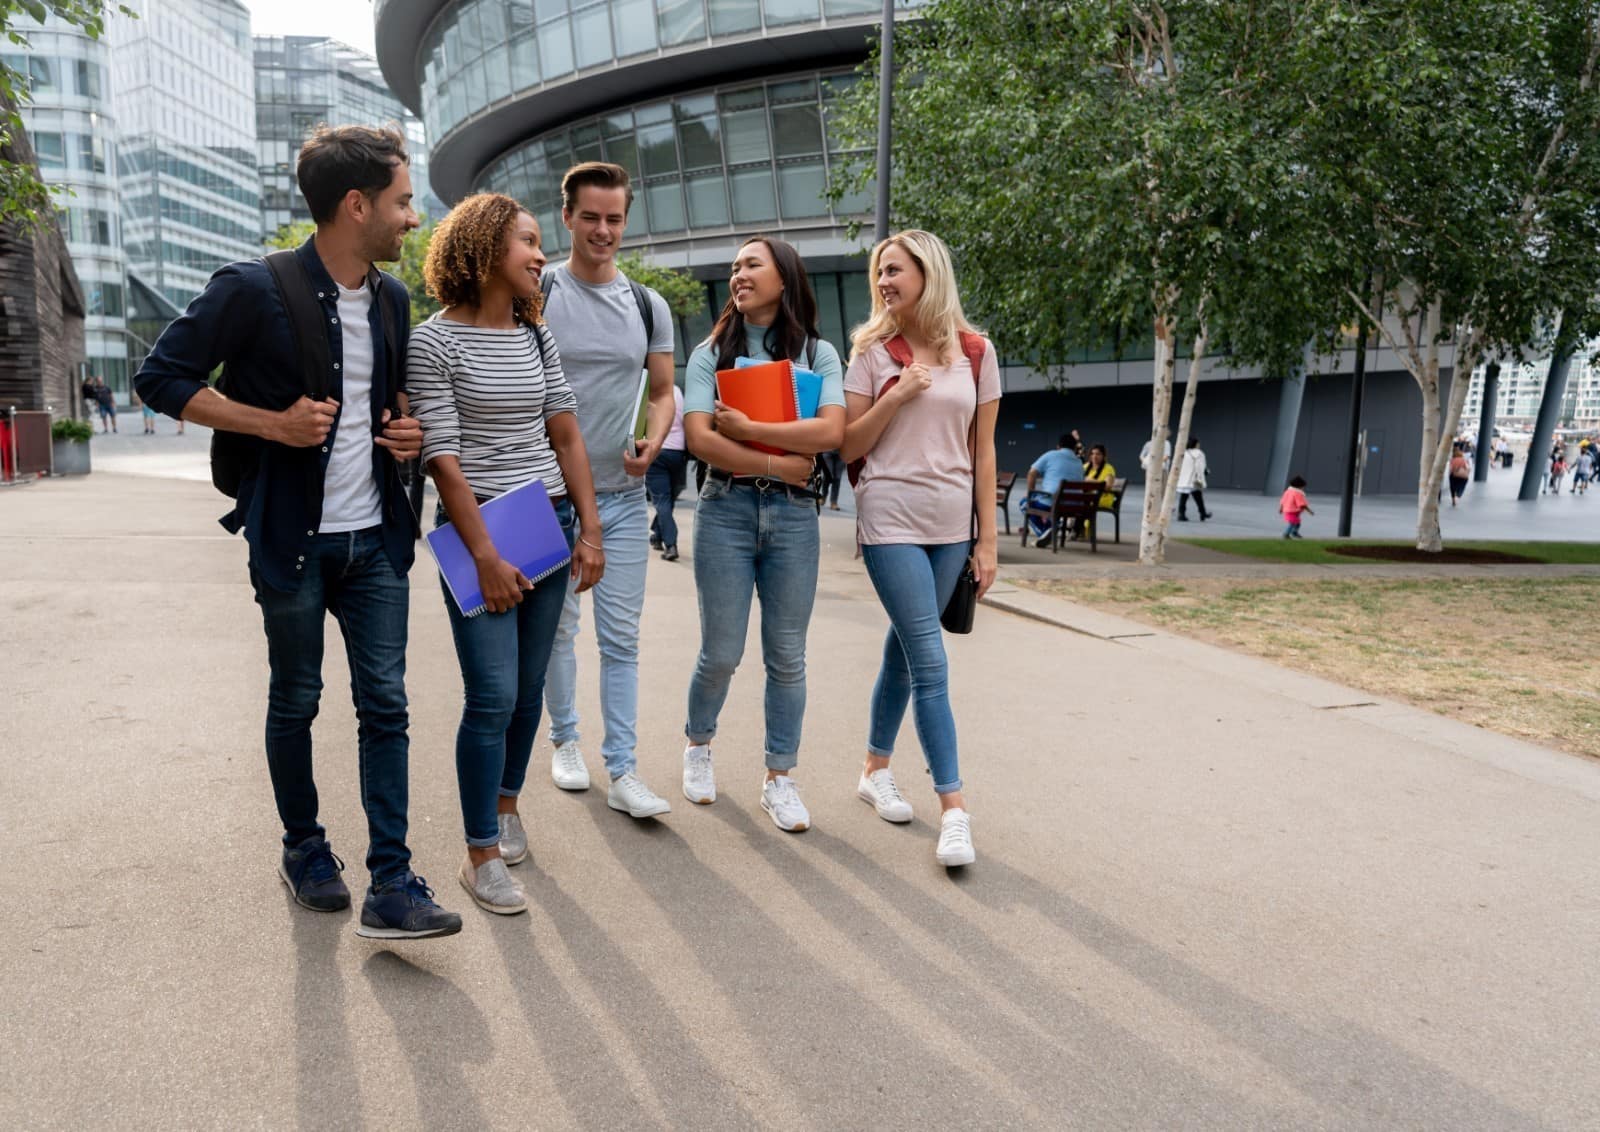 Group of students walking in a foreign city.